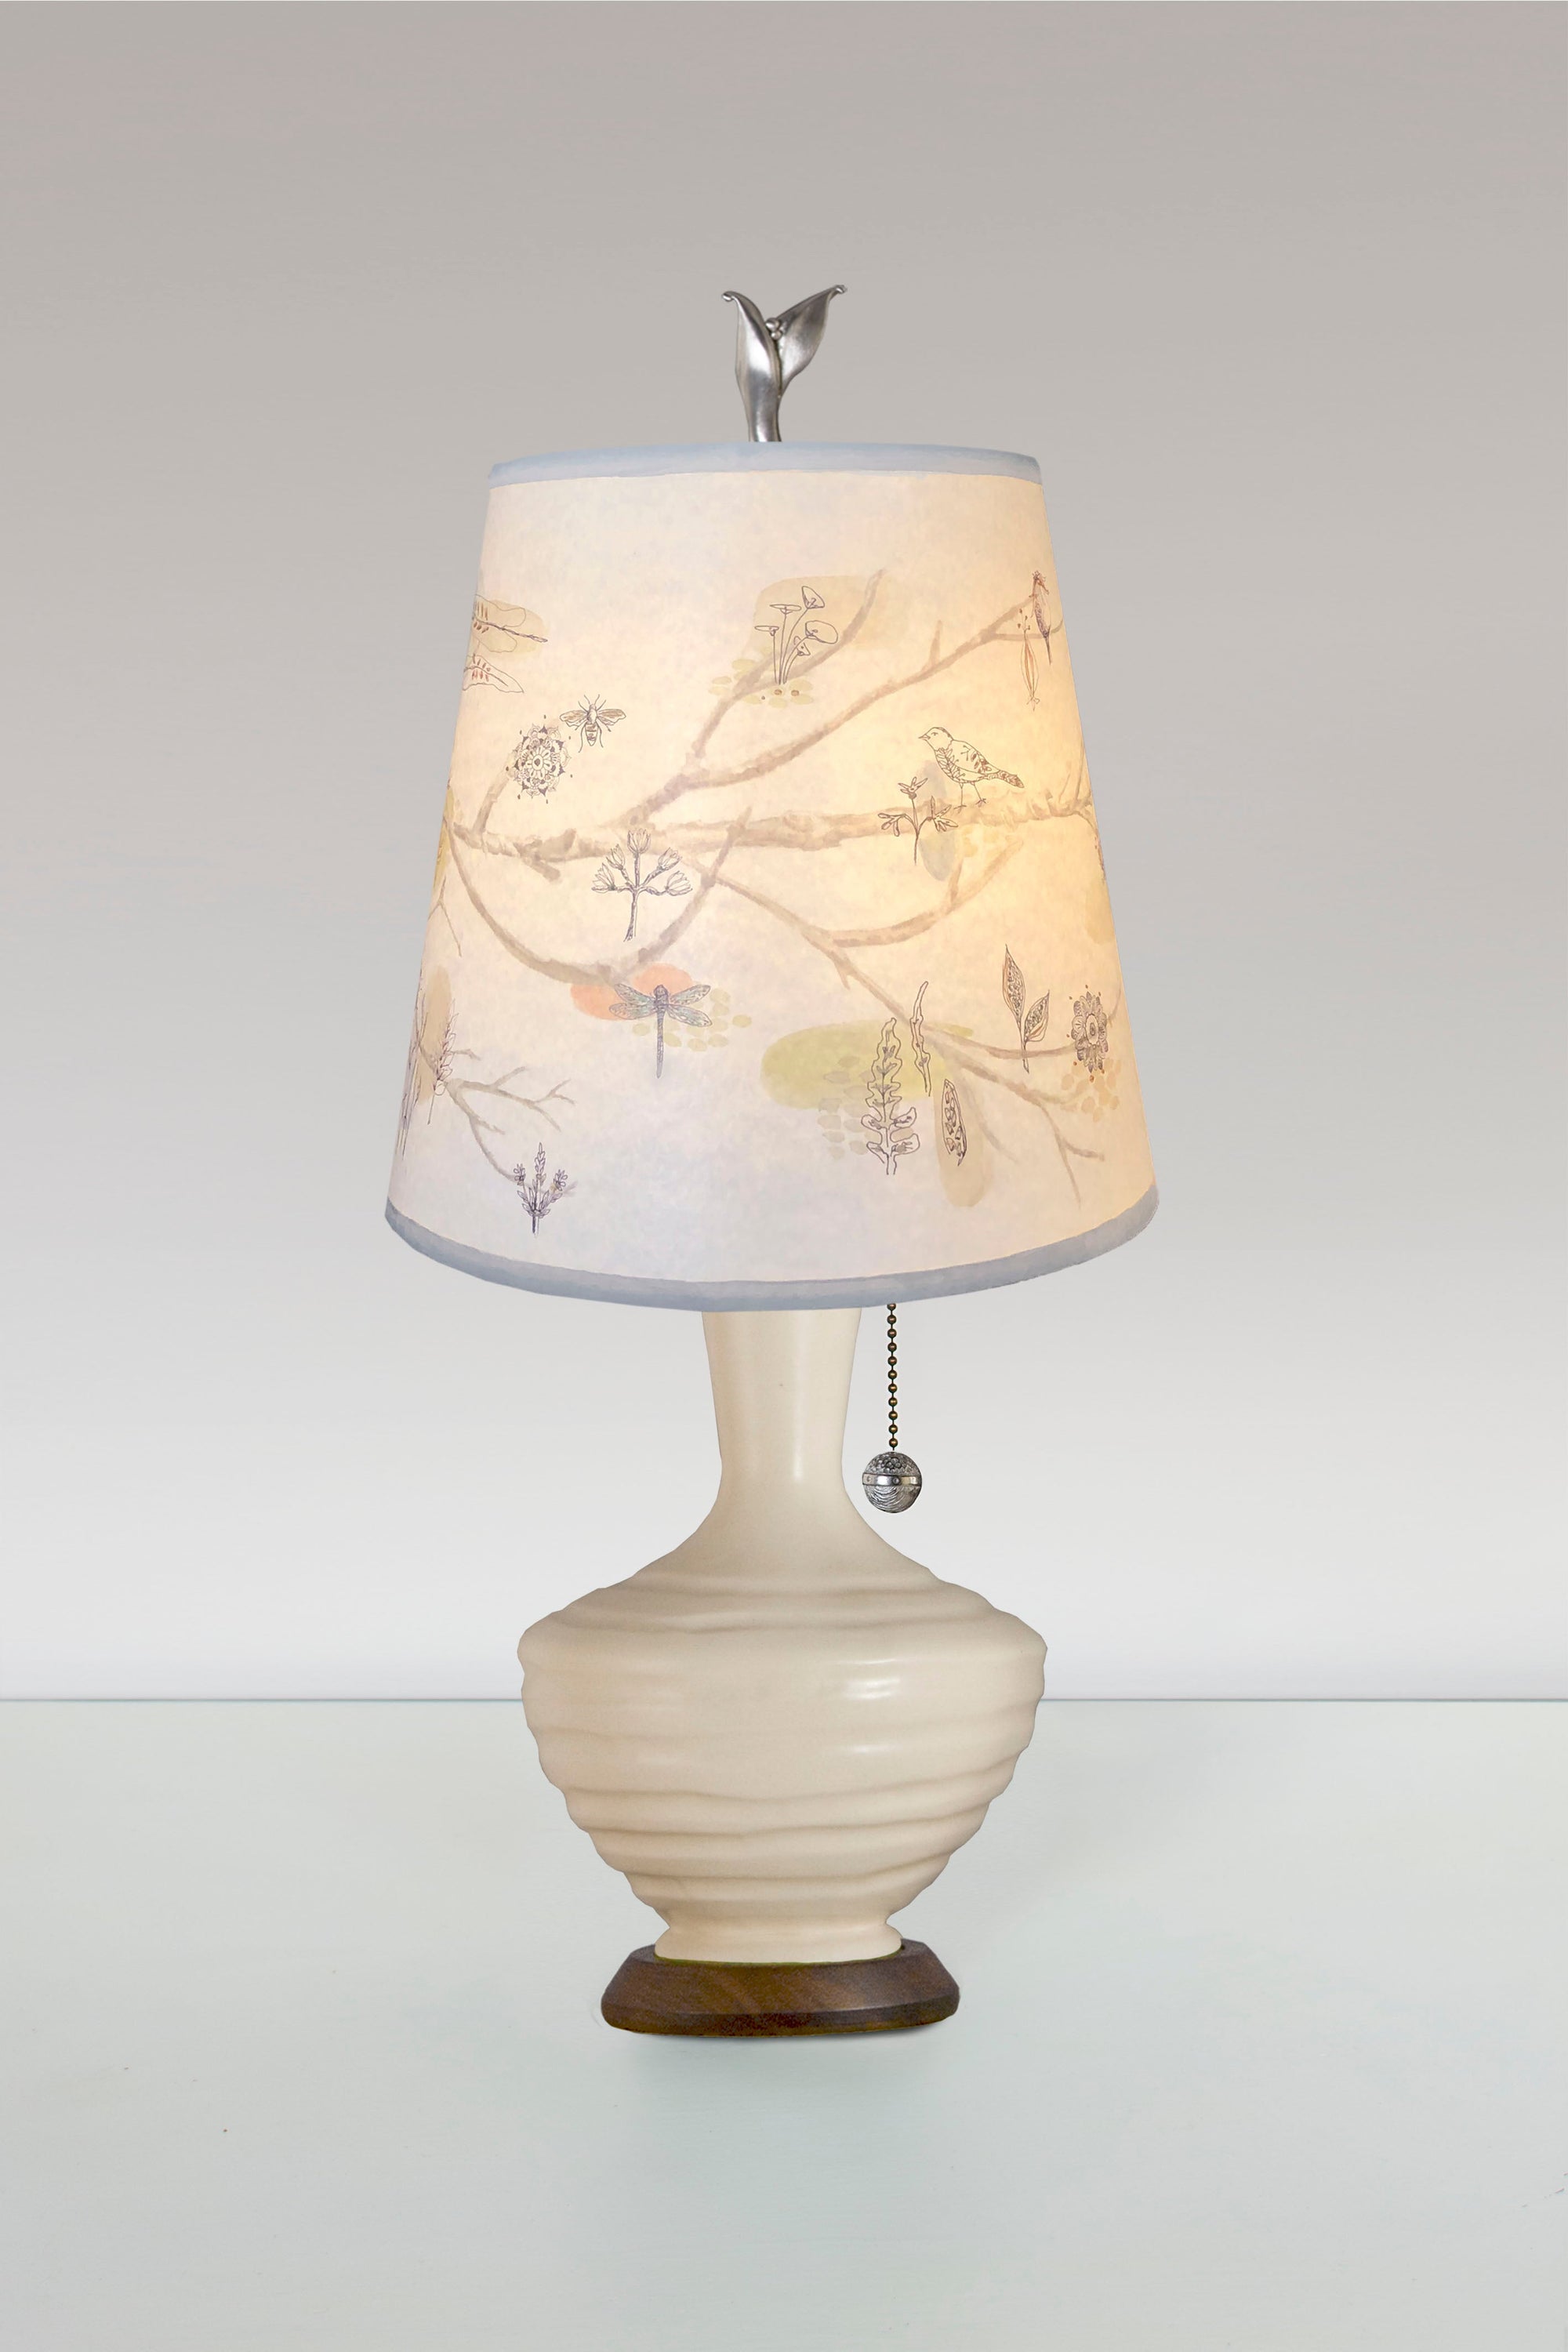 Janna Ugone & Co Table Lamps Ceramic Table Lamp with Small Drum Shade in Artful Branch